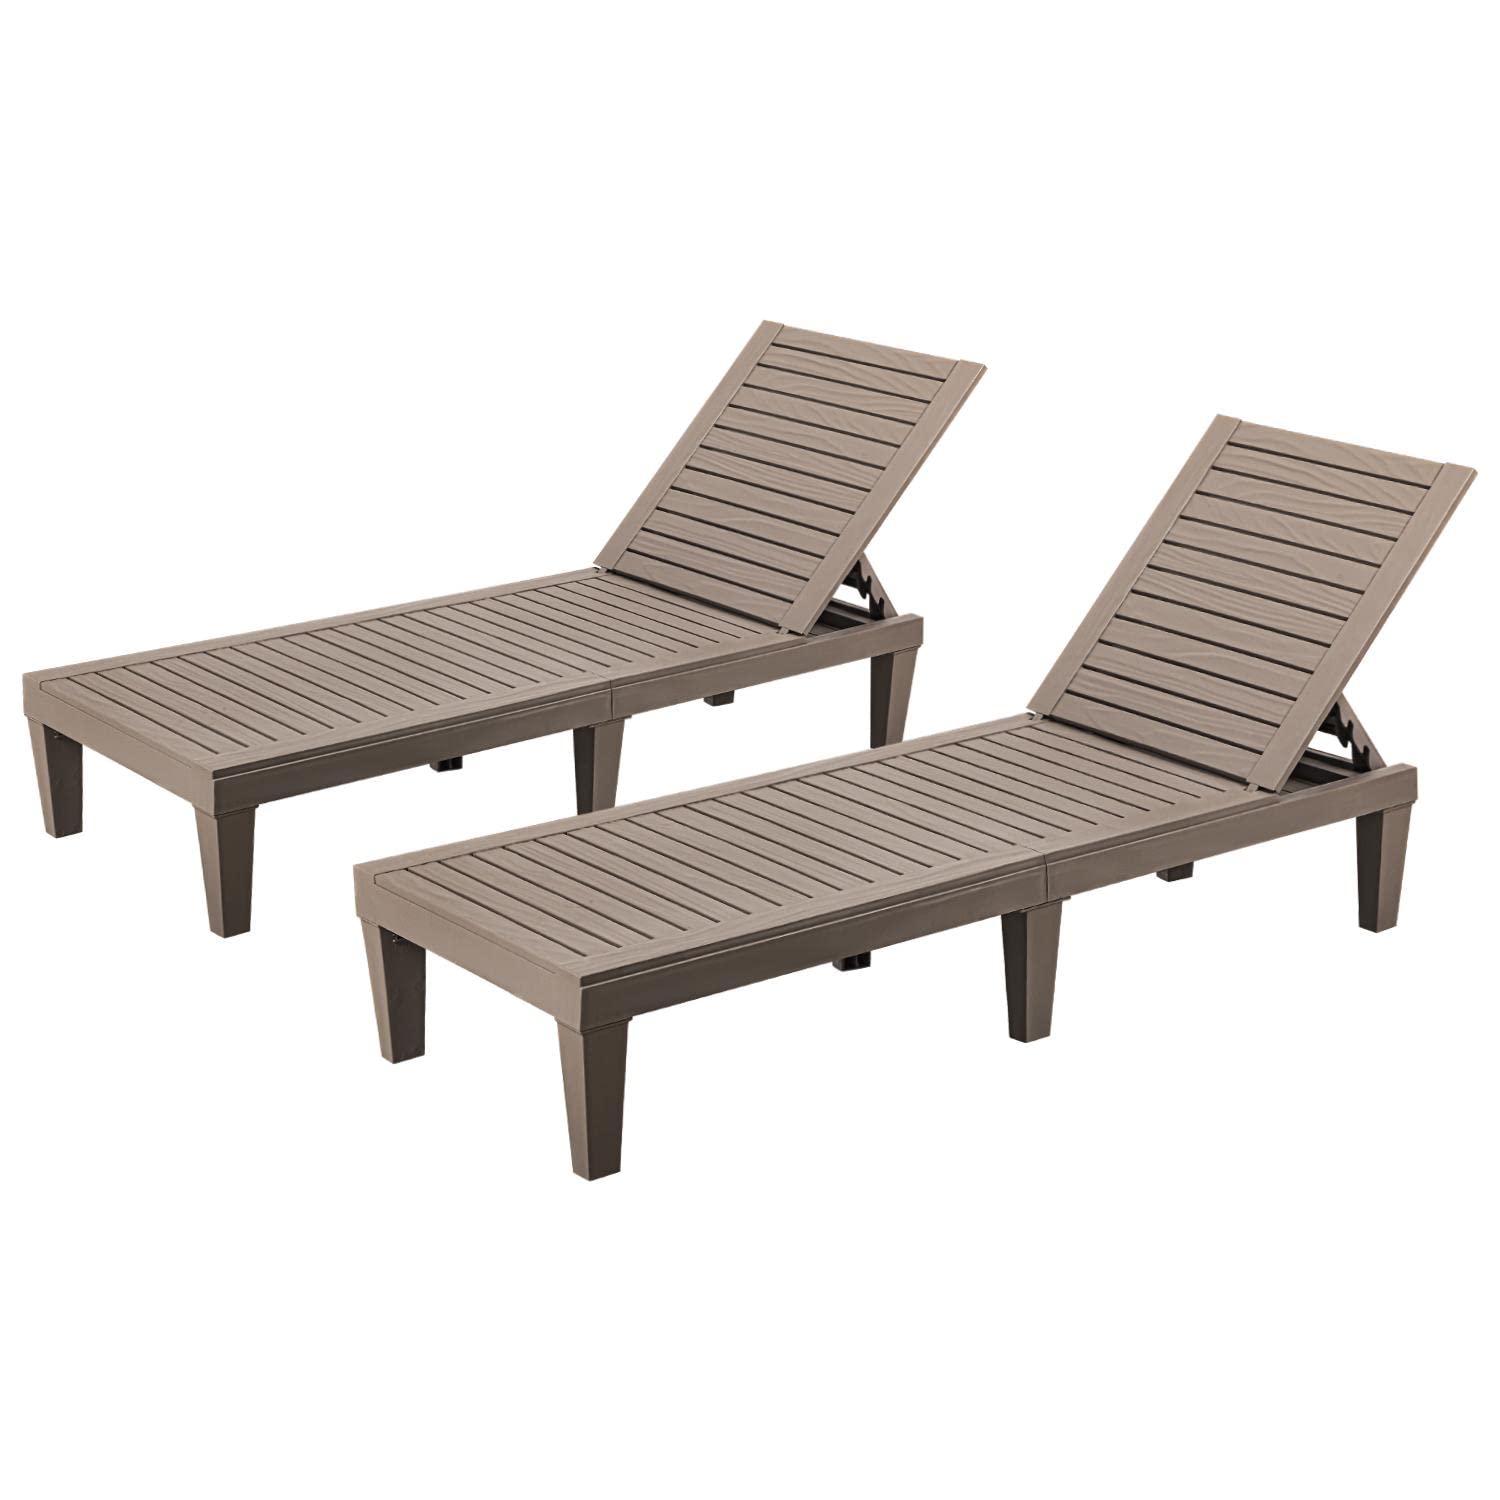 Homall Outdoor Chaise Lounge Chairs Set of 2, Quick Assembly & Waterproof & Lightweight Loungers with Adjustable Back for Poolside, Beach, Garden and Yard (Taupe)